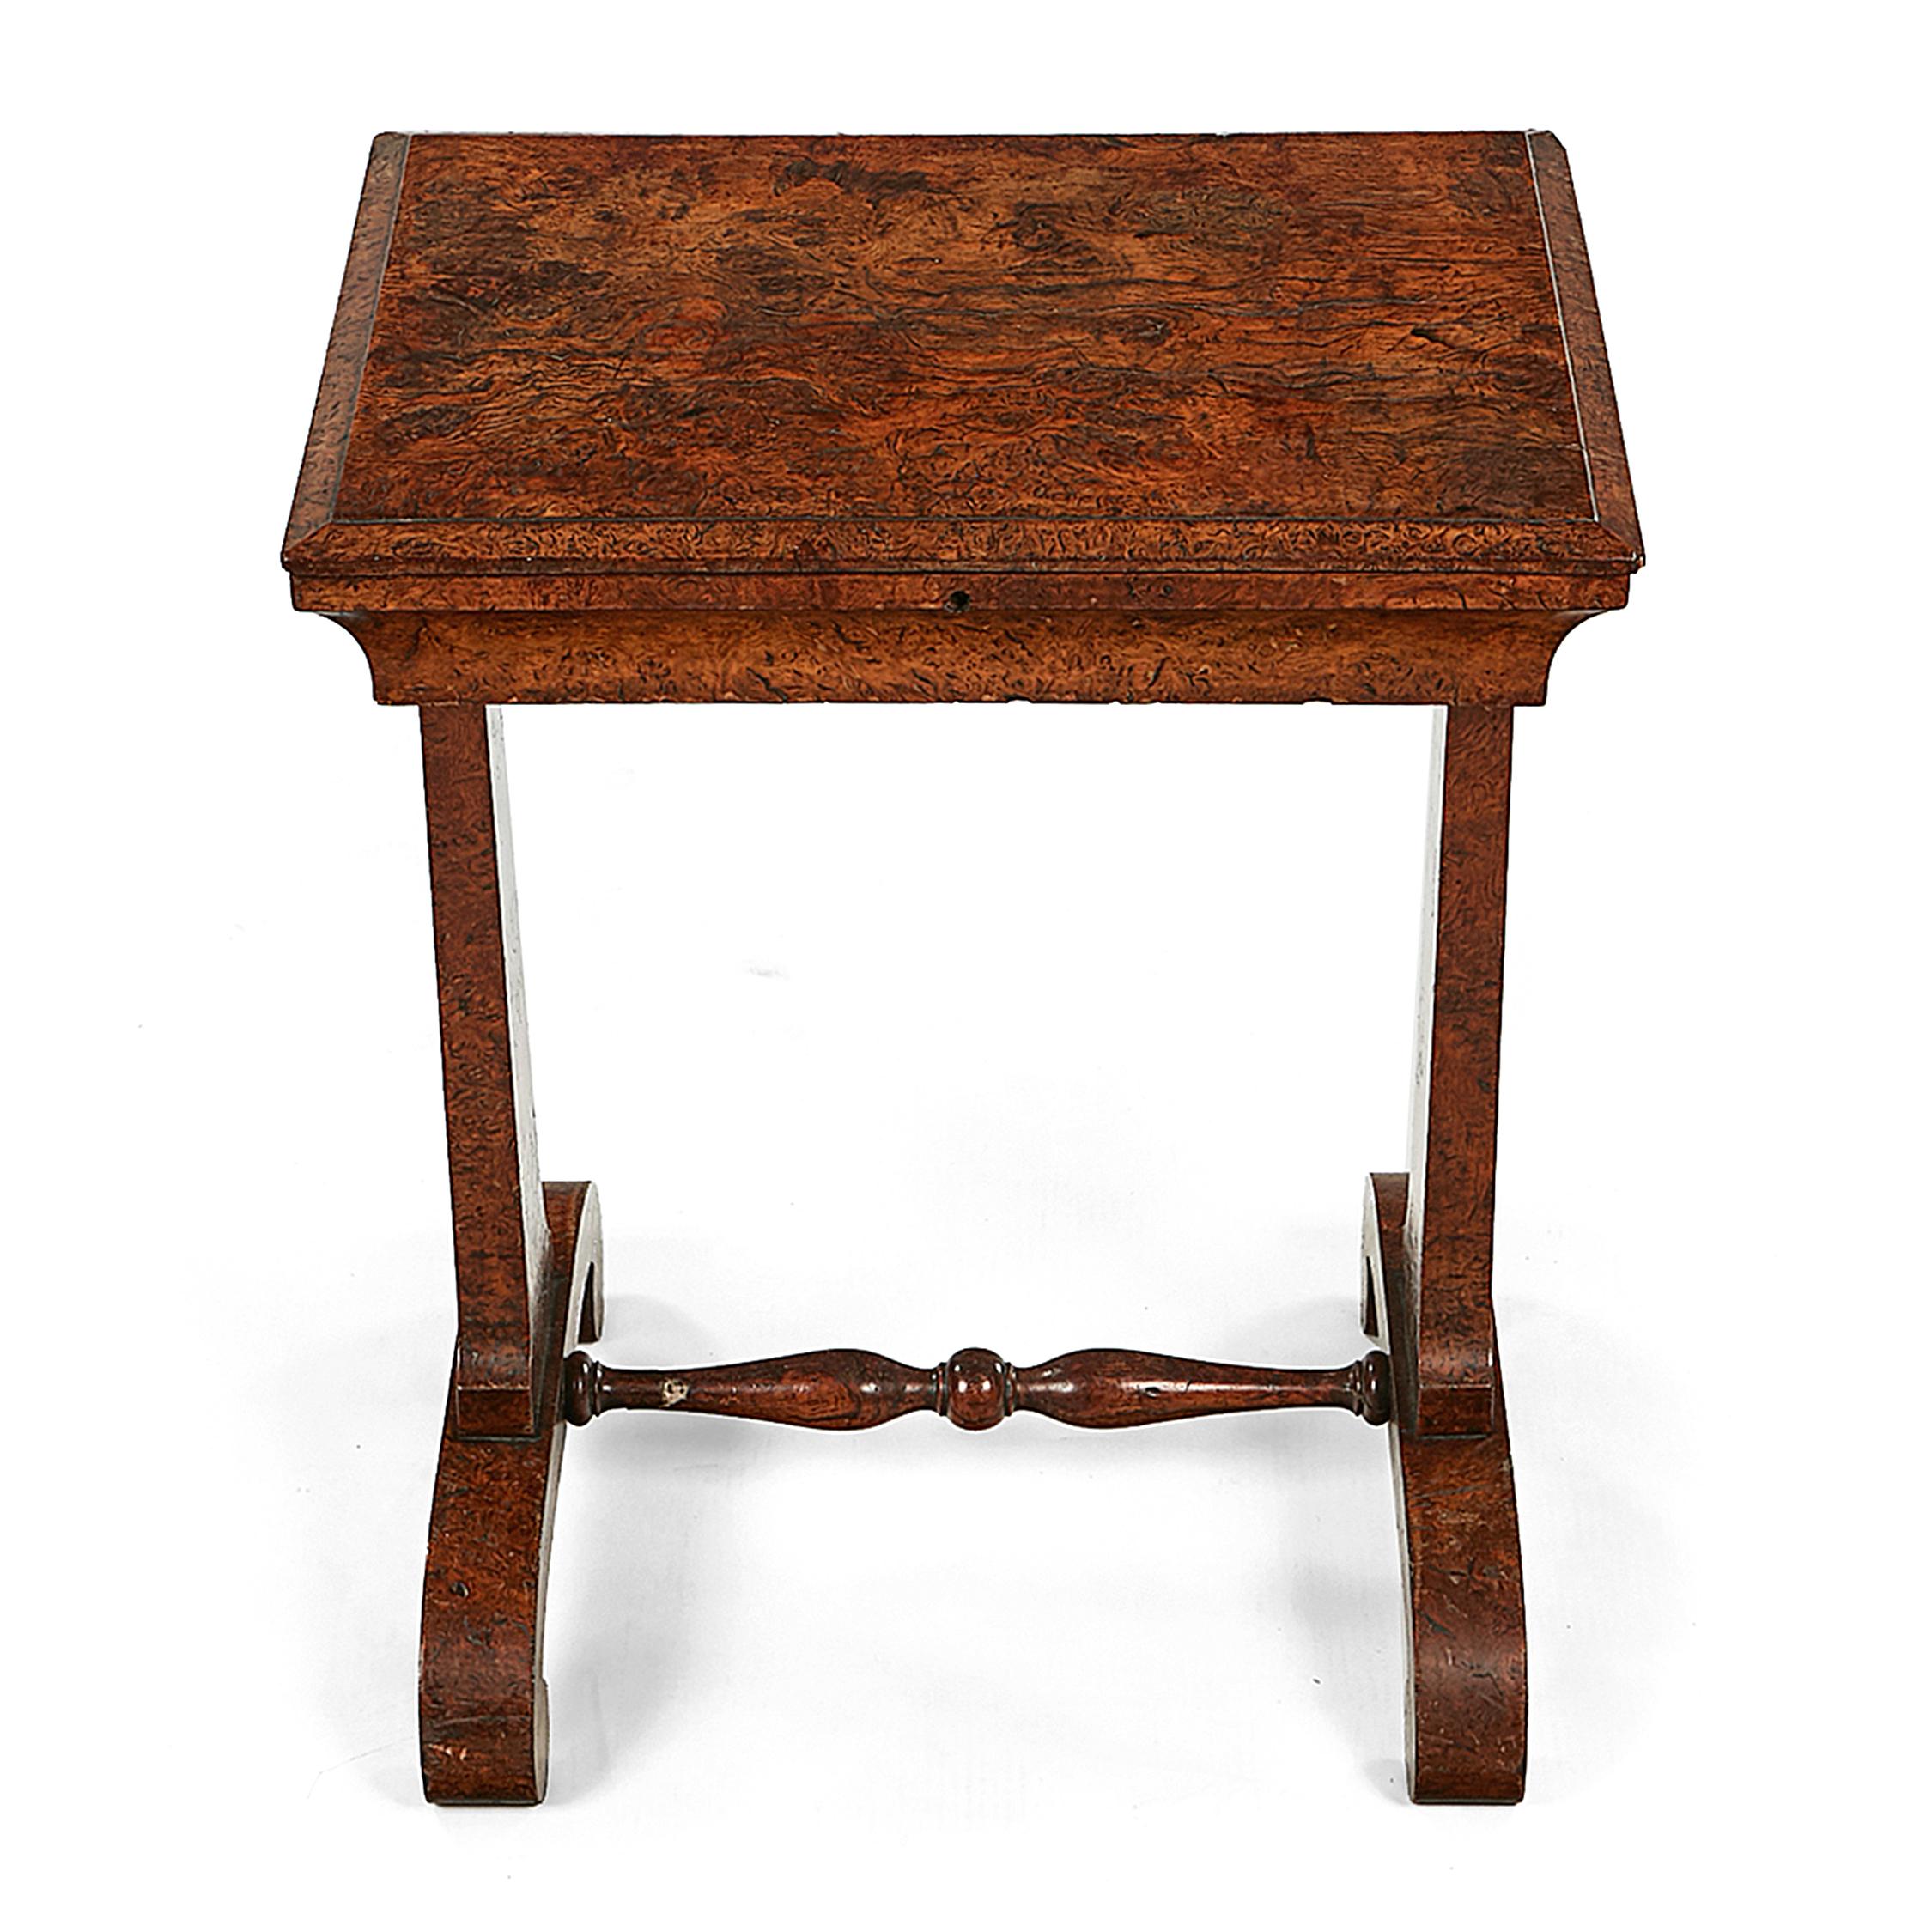 Early 19th Century Irish Regency Burr Elm Work Table In Excellent Condition For Sale In New York, NY